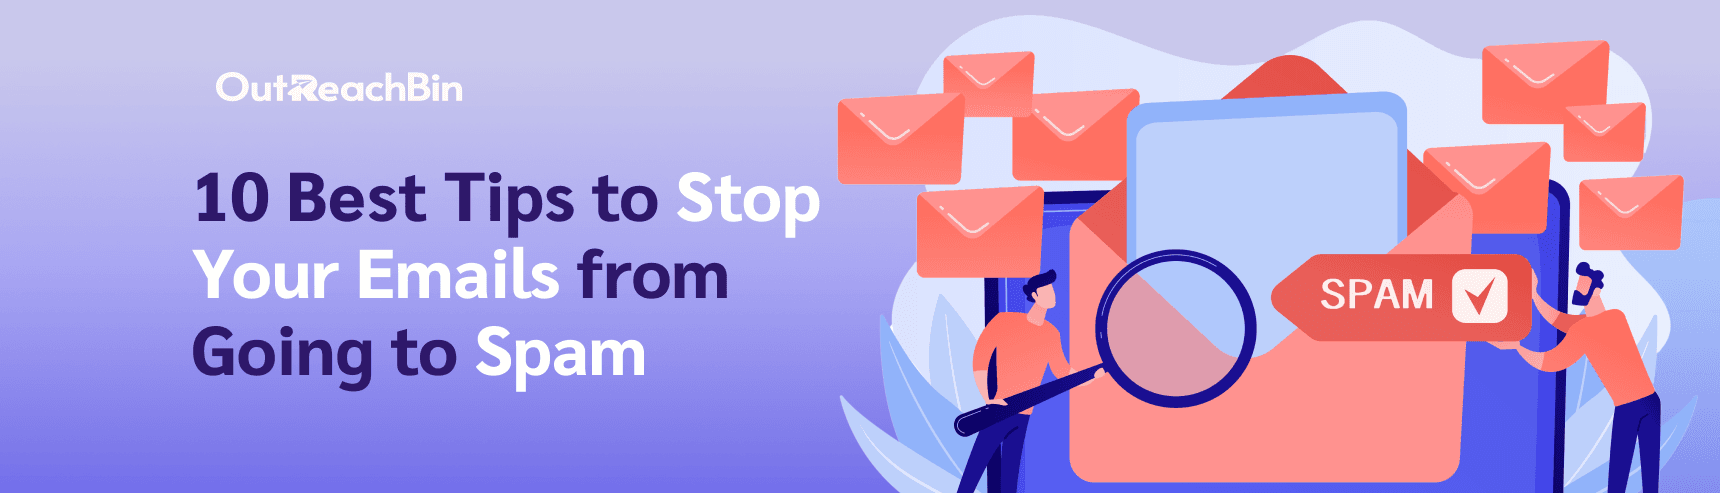 10 Best Tips to Stop Your Emails from Going to Spam cover